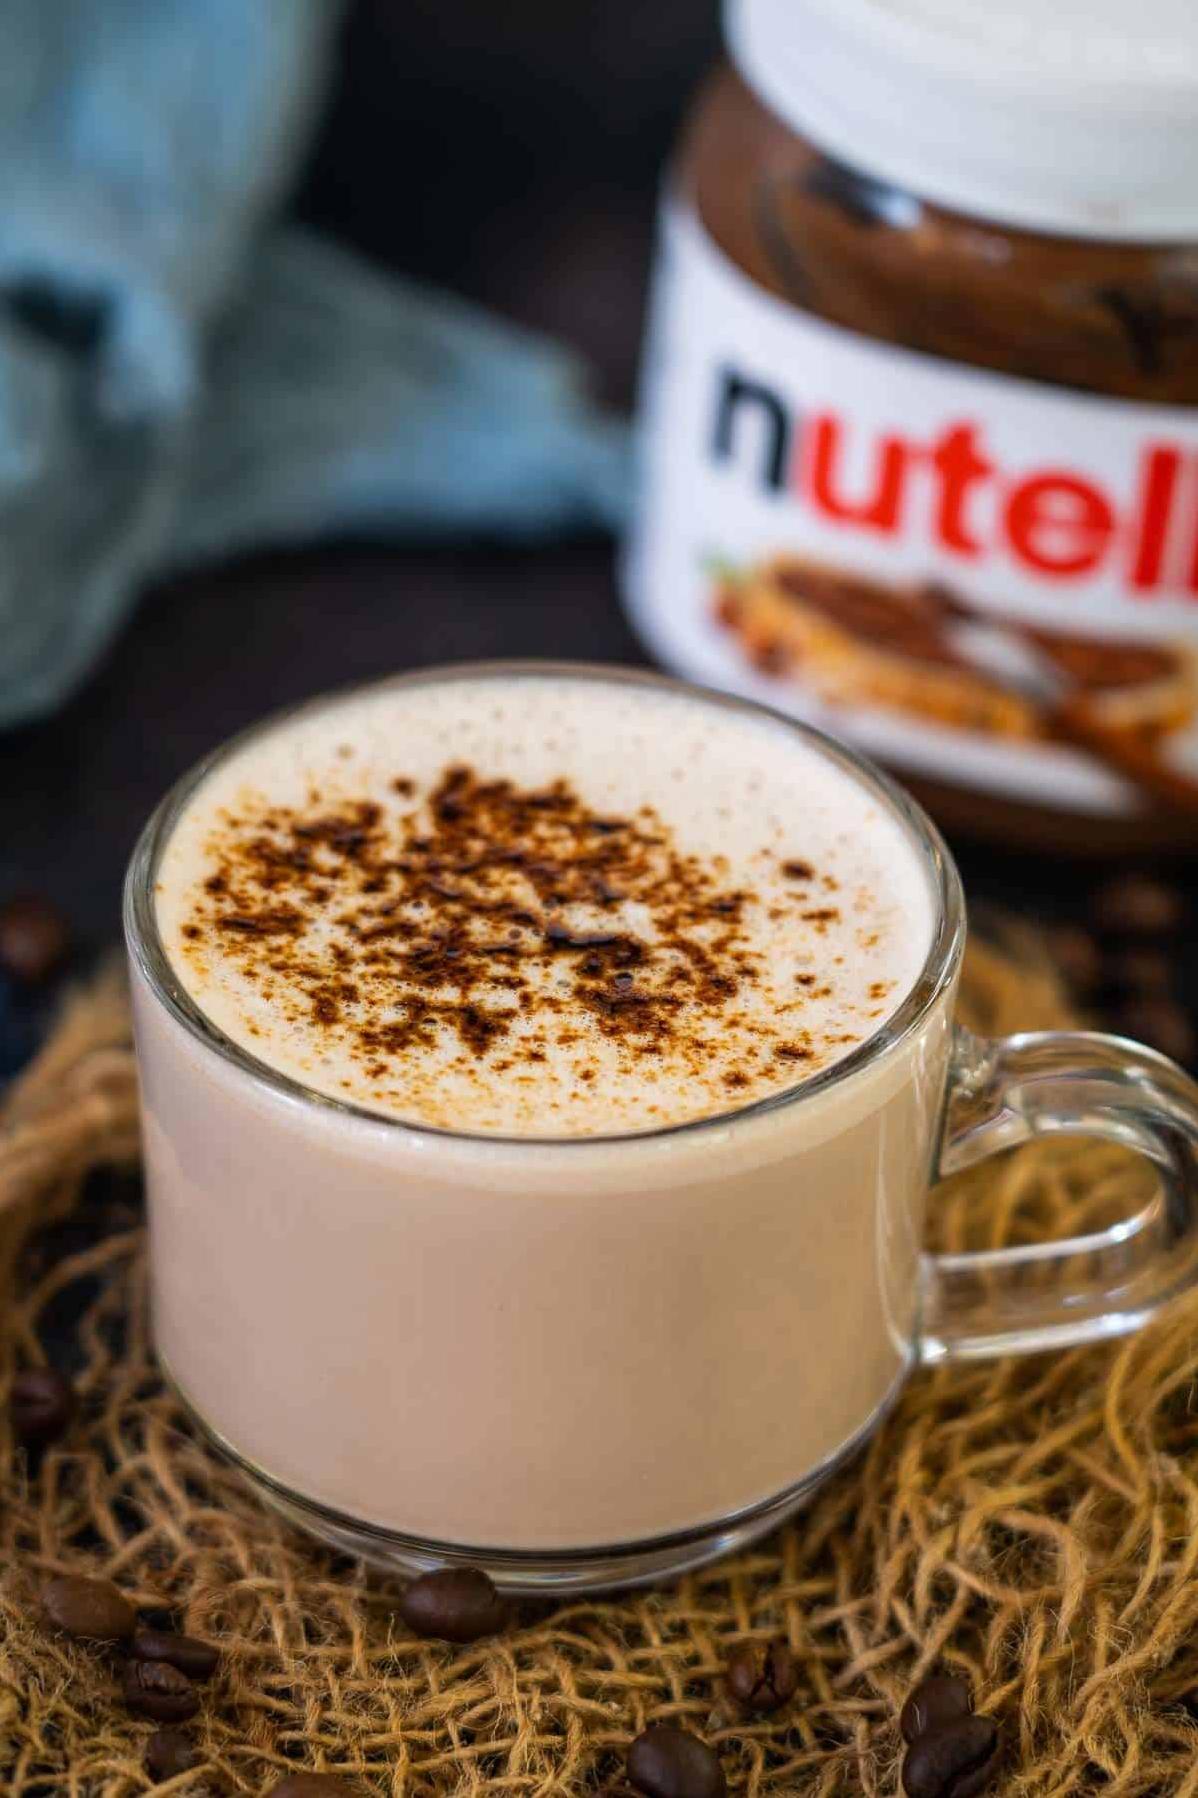  Nothing beats the aroma of freshly brewed coffee combined with the sweet, nutty flavor of Nutella.